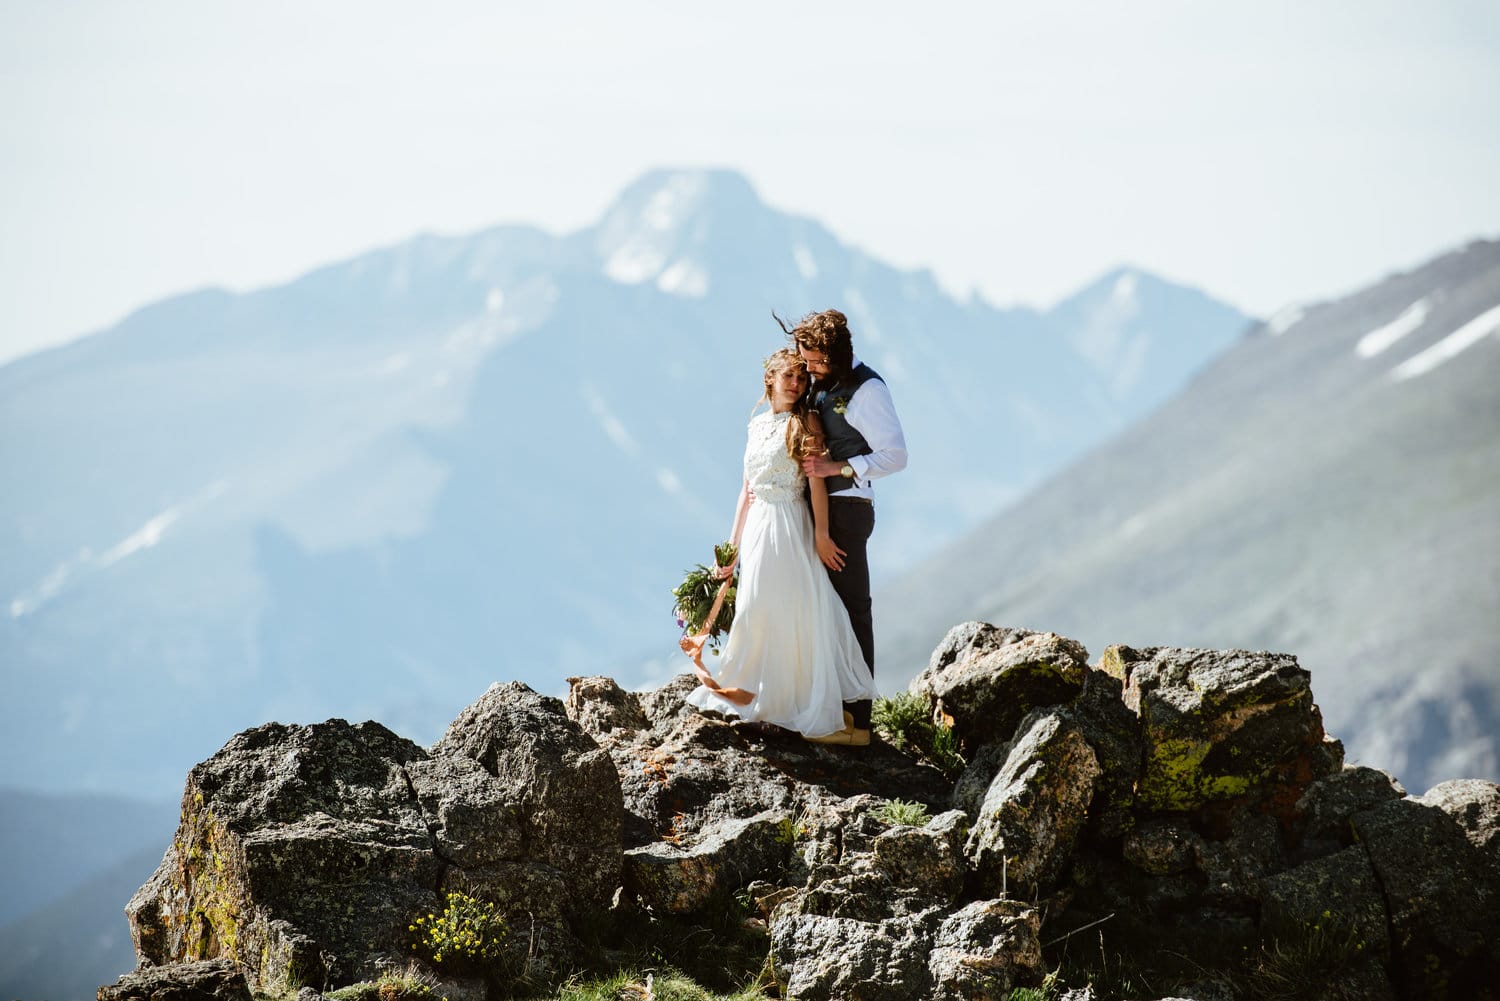 Bride and groom embrace at the top of a cliff on their elopement day at Trail Ridge Road, Colorado. There are mountains in the background. 